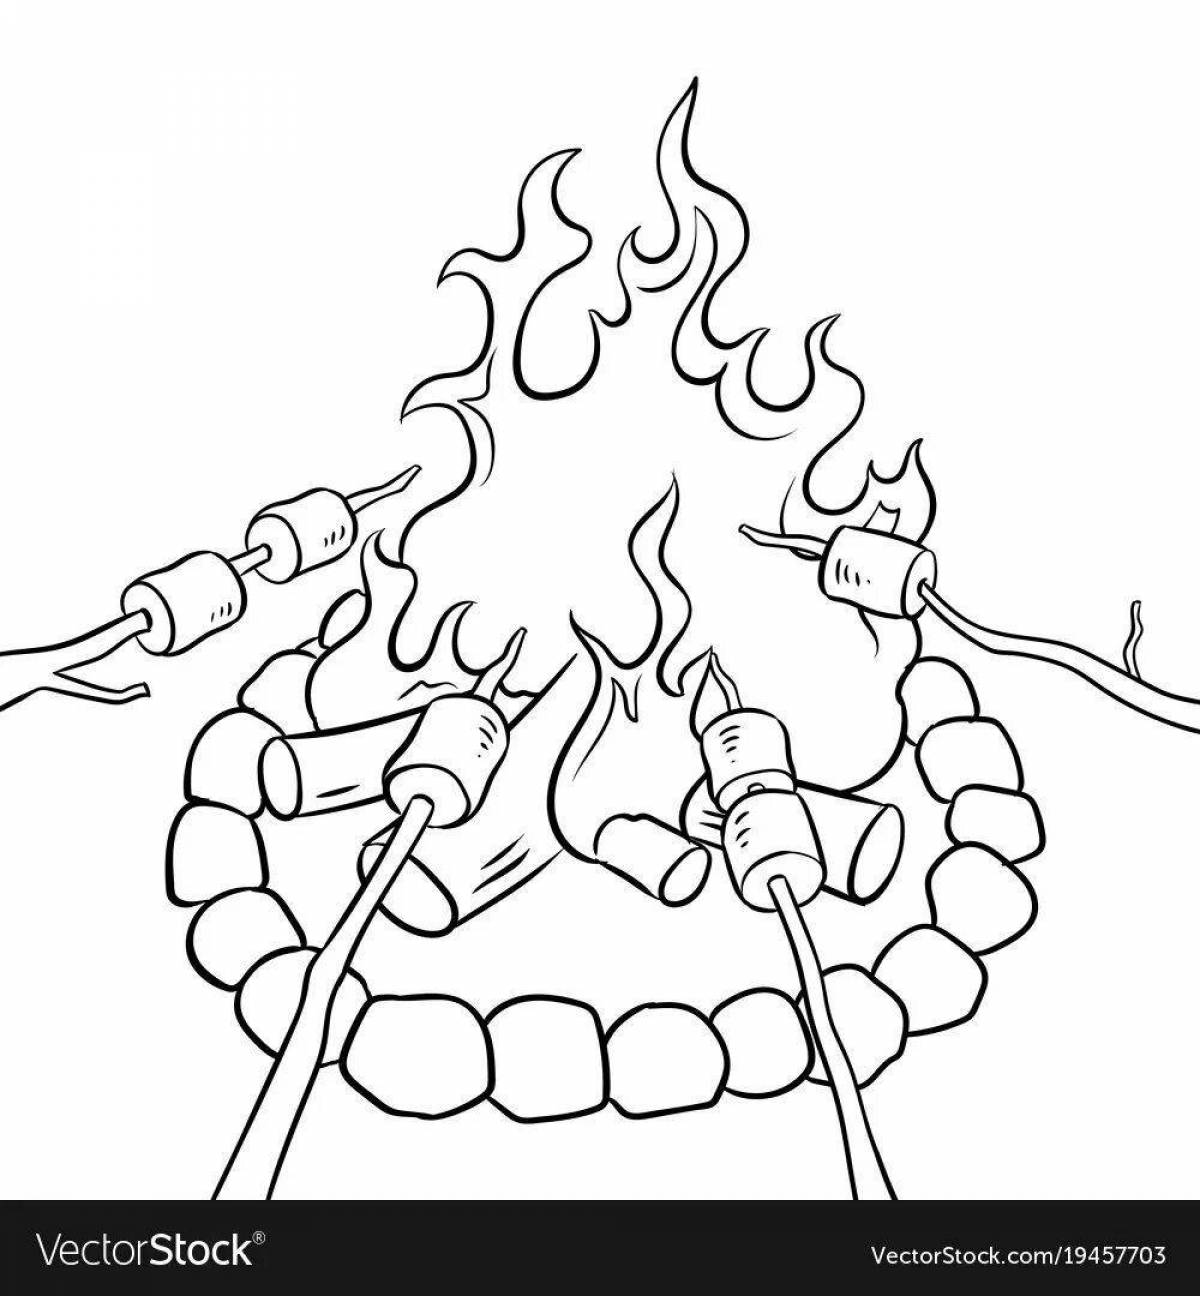 Fancy fire coloring book for 3-4 year olds